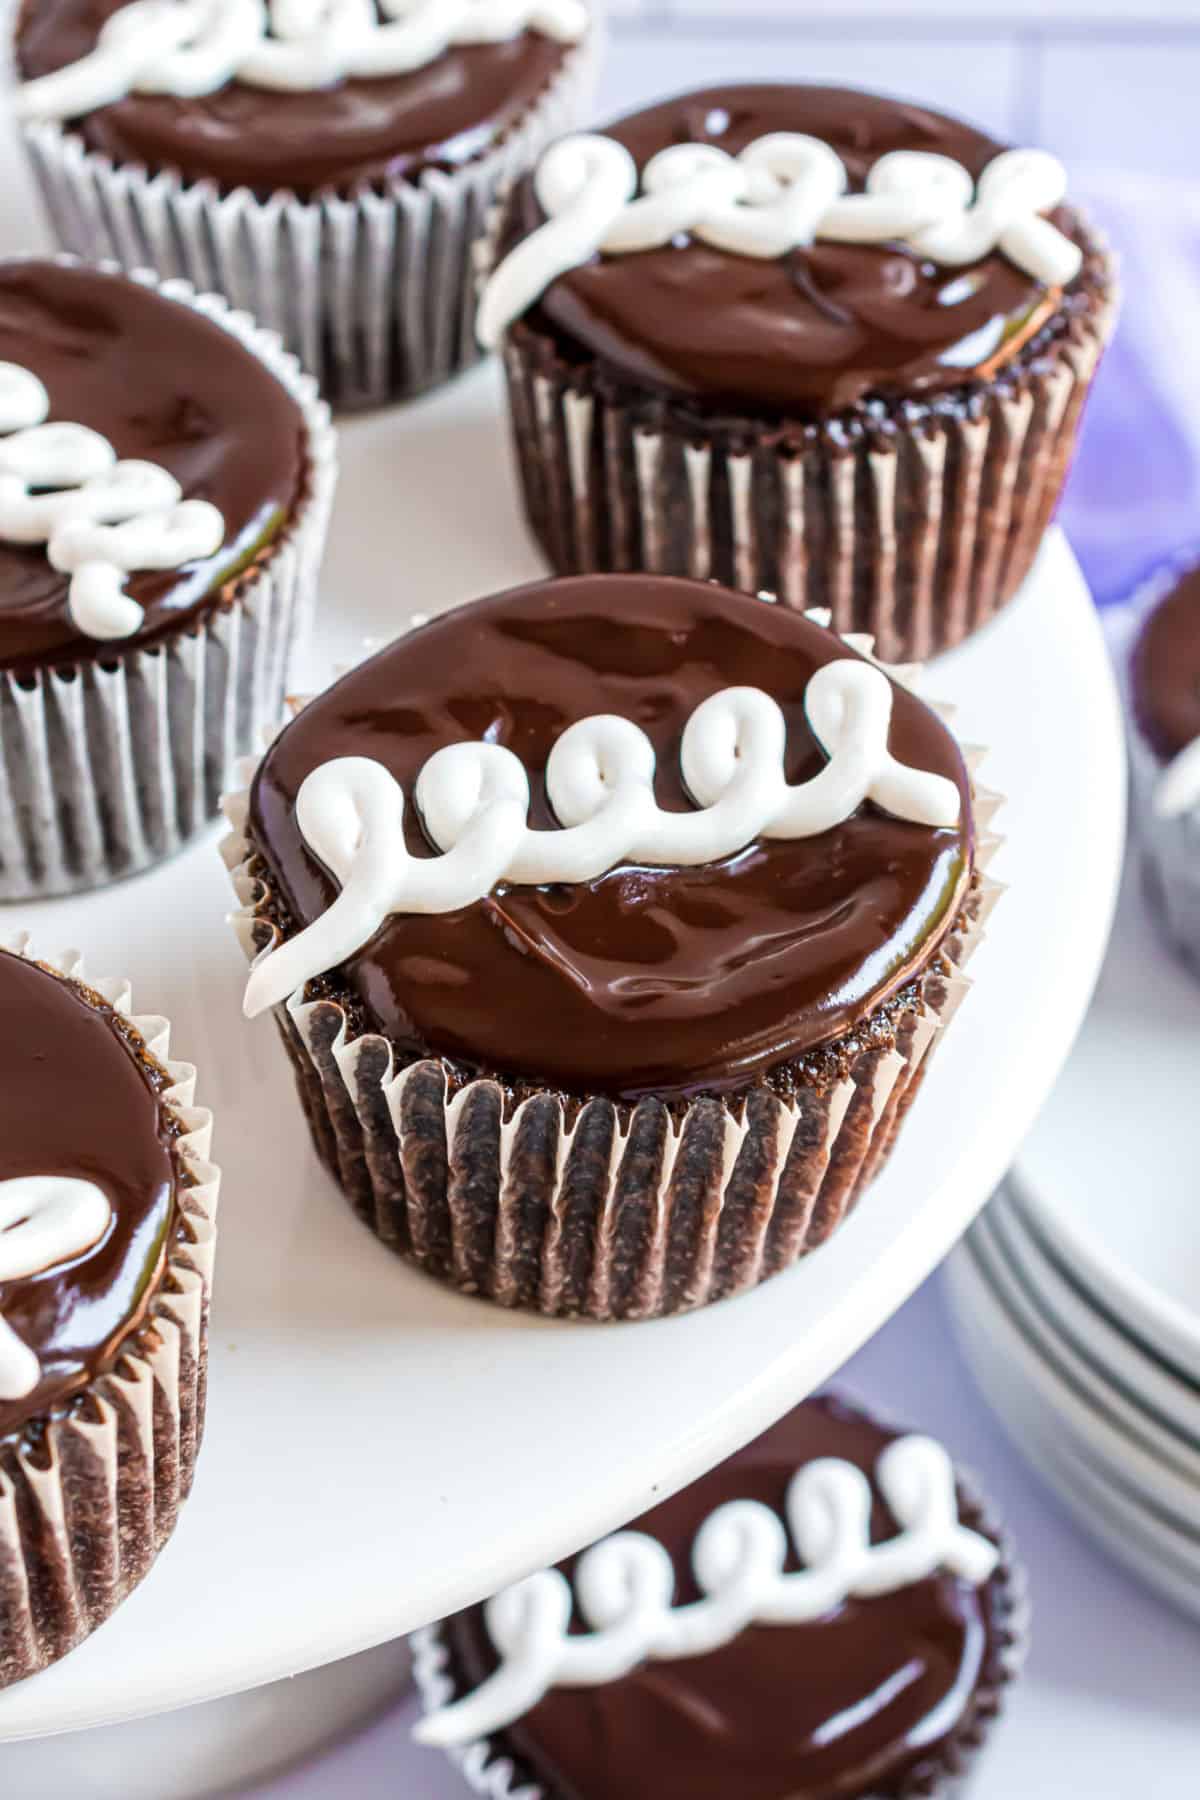 Hostess cupcakes on a white serving plate.